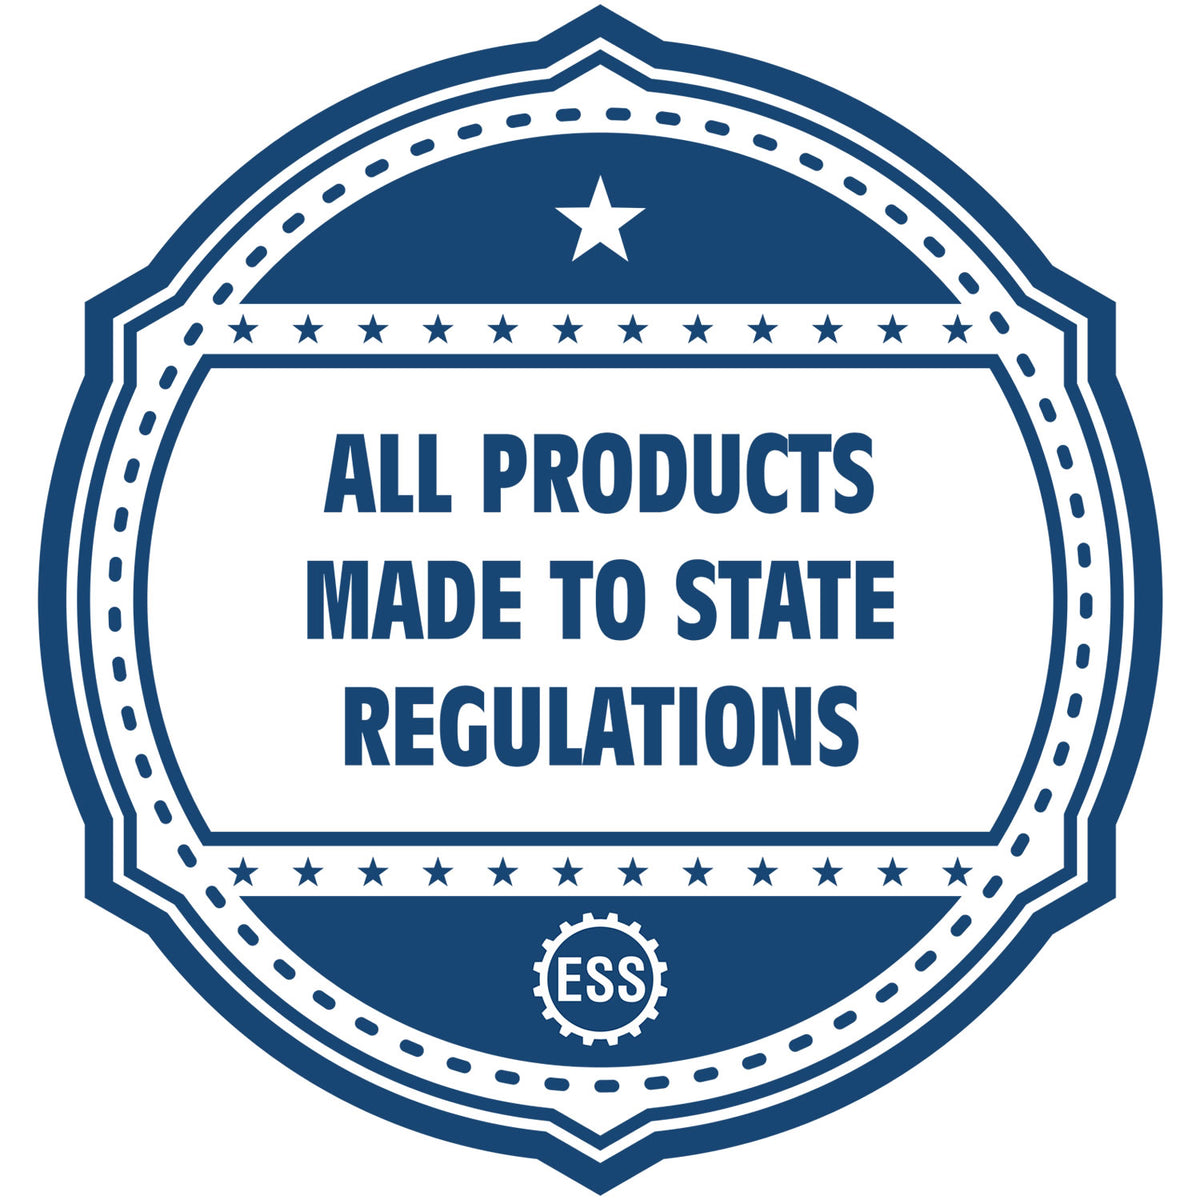 An icon or badge element for the MaxLight Premium Pre-Inked South Dakota Rectangular Notarial Stamp showing that this product is made in compliance with state regulations.